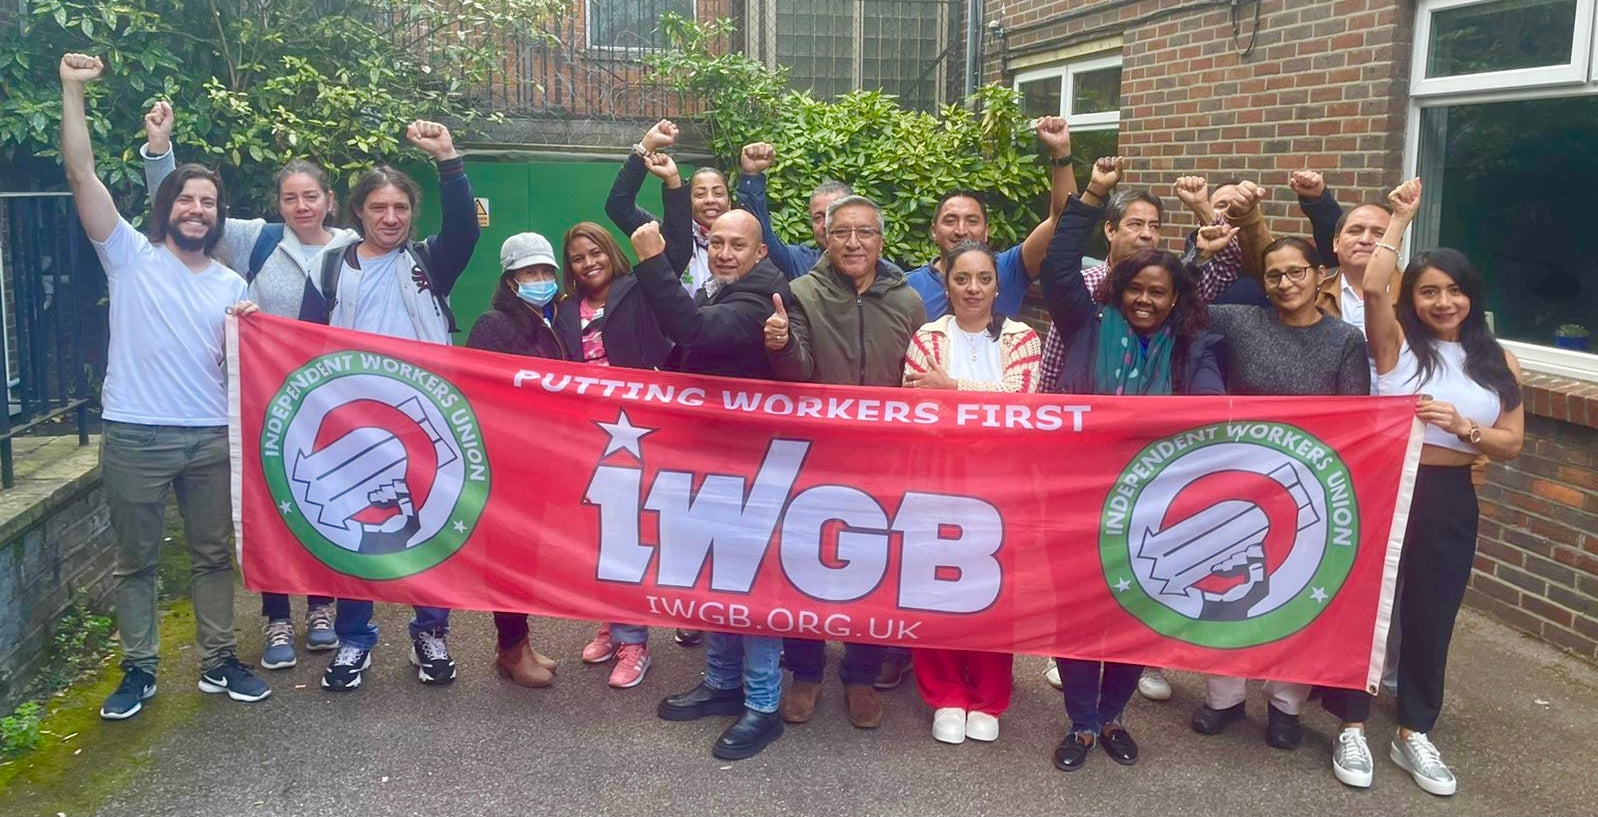 Cleaners at HCA’s London Bridge Hospital are campaigning for better pay and conditions